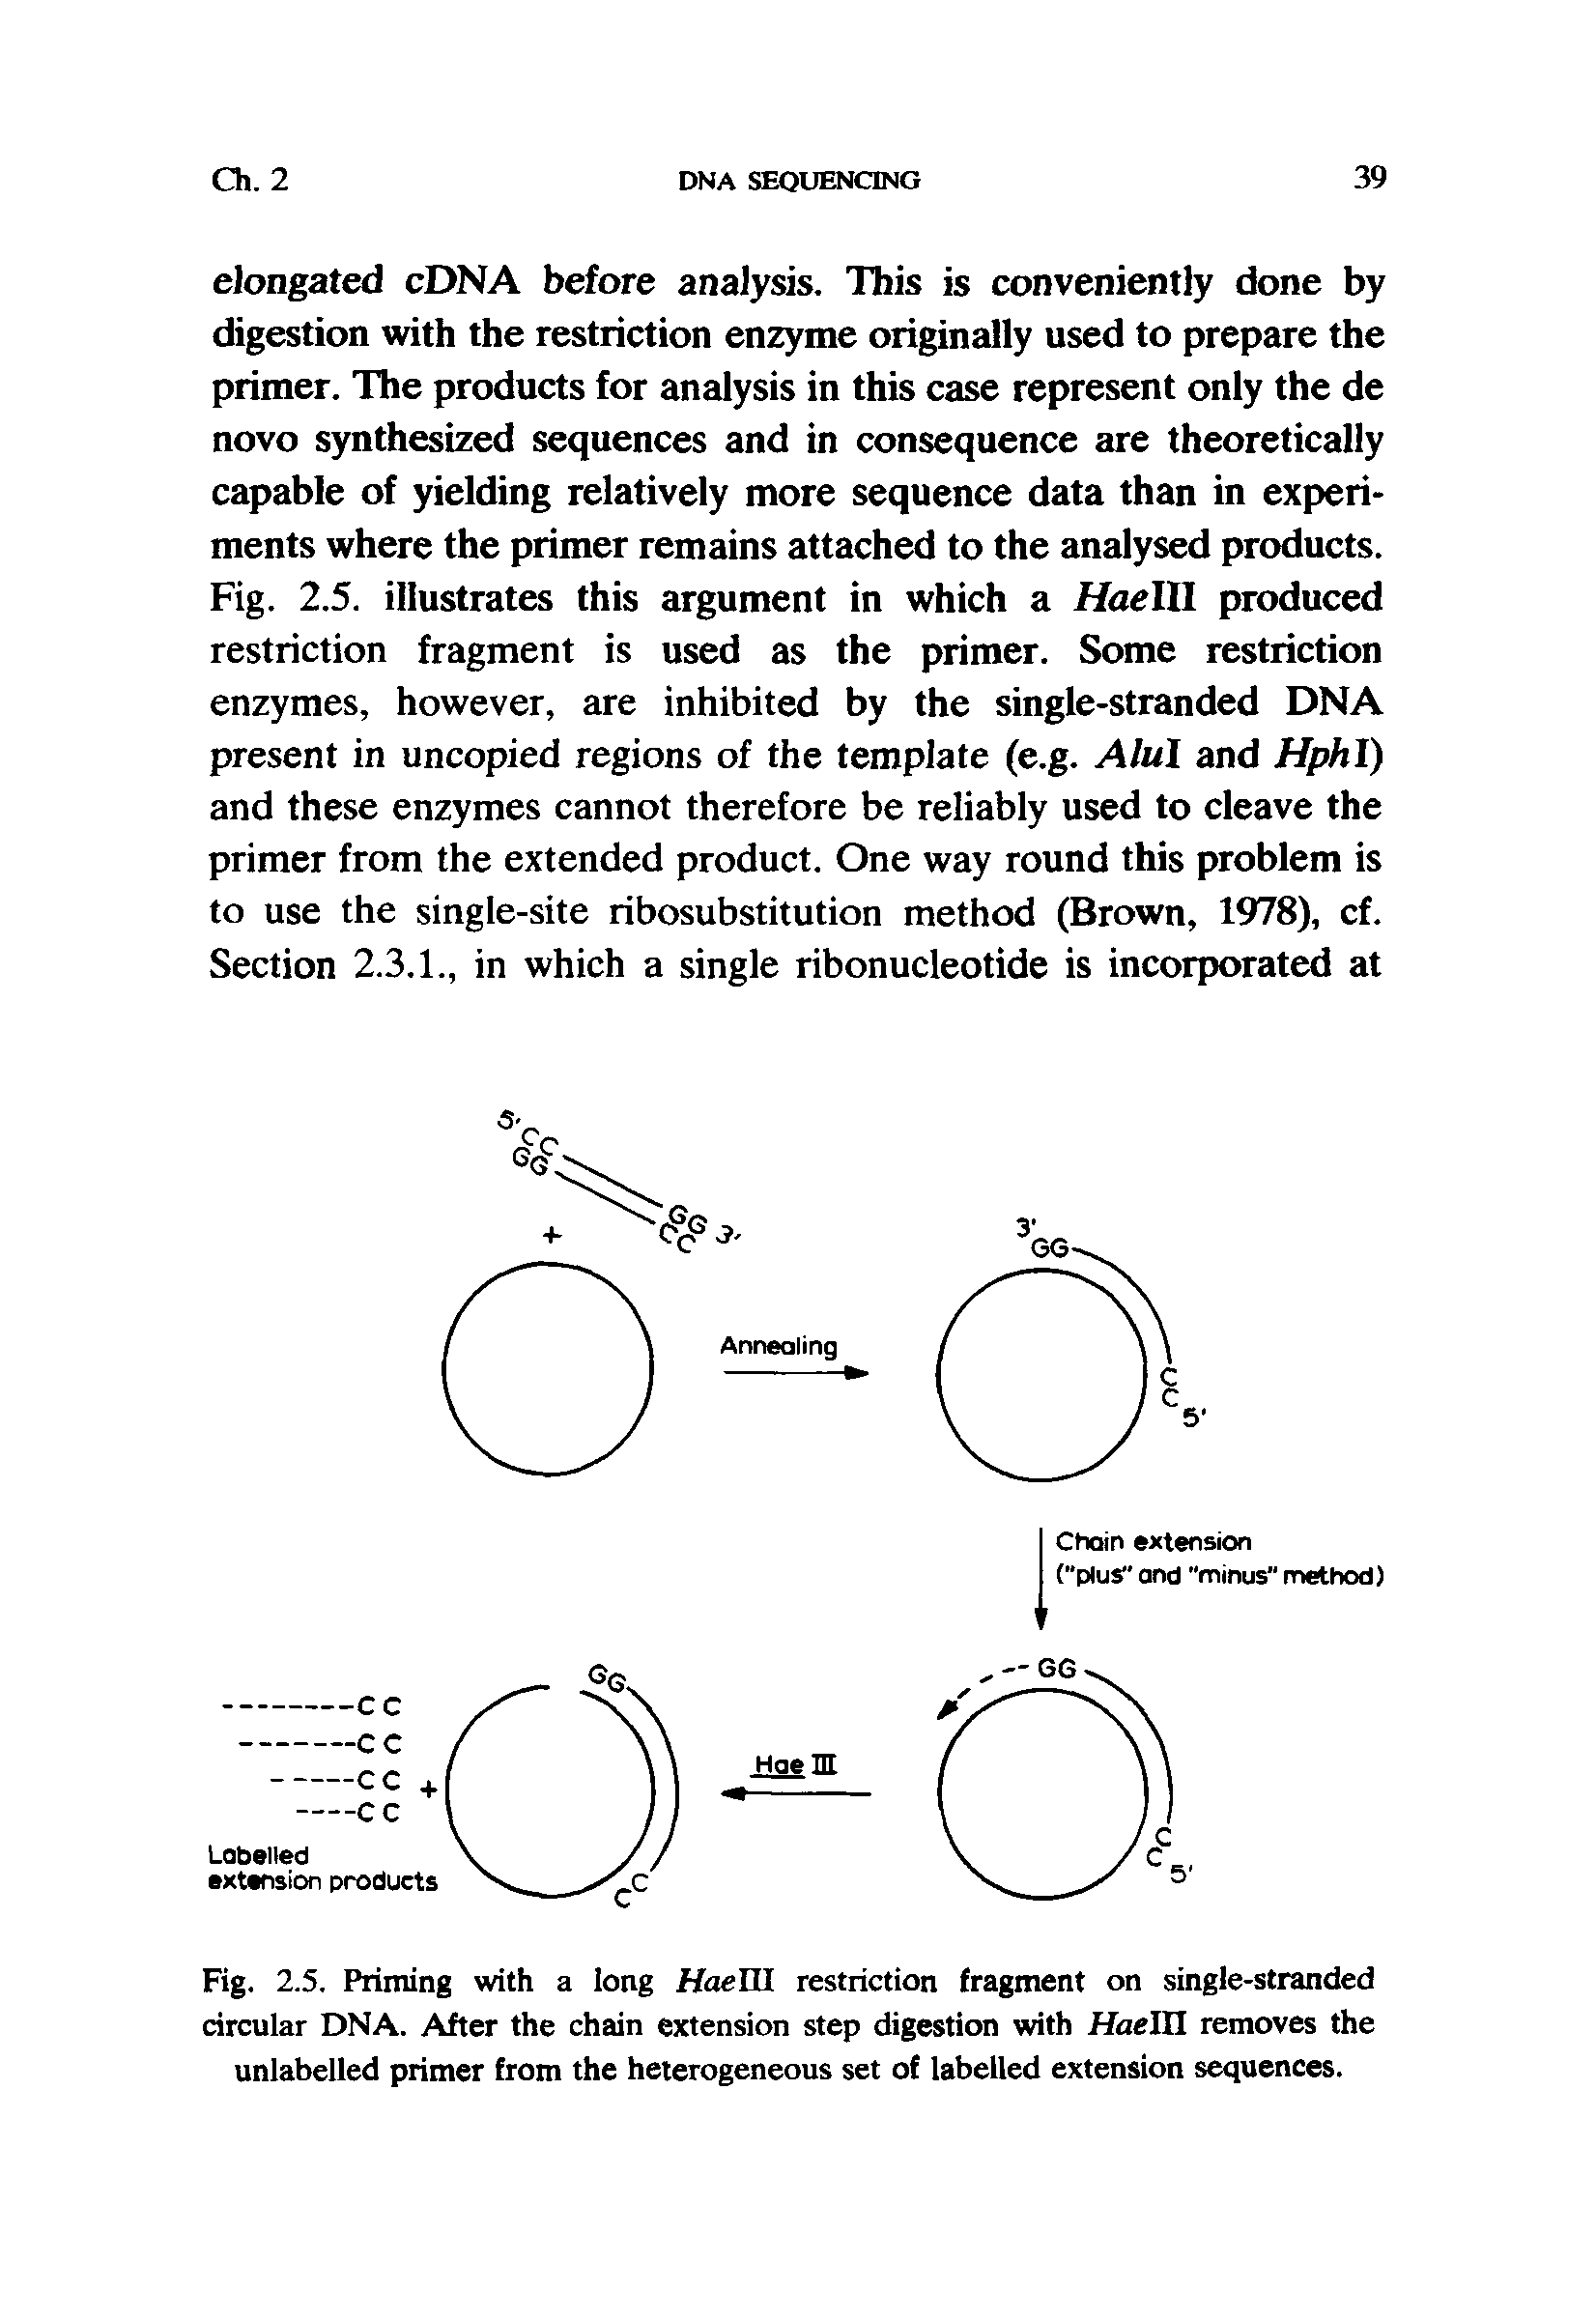 Fig. 2.5. Priming with a long Hae HI restriction fragment on single-stranded circular DNA. After the chain extension step digestion with Hae III removes the unlabelled primer from the heterogeneous set of labelled extension sequences.